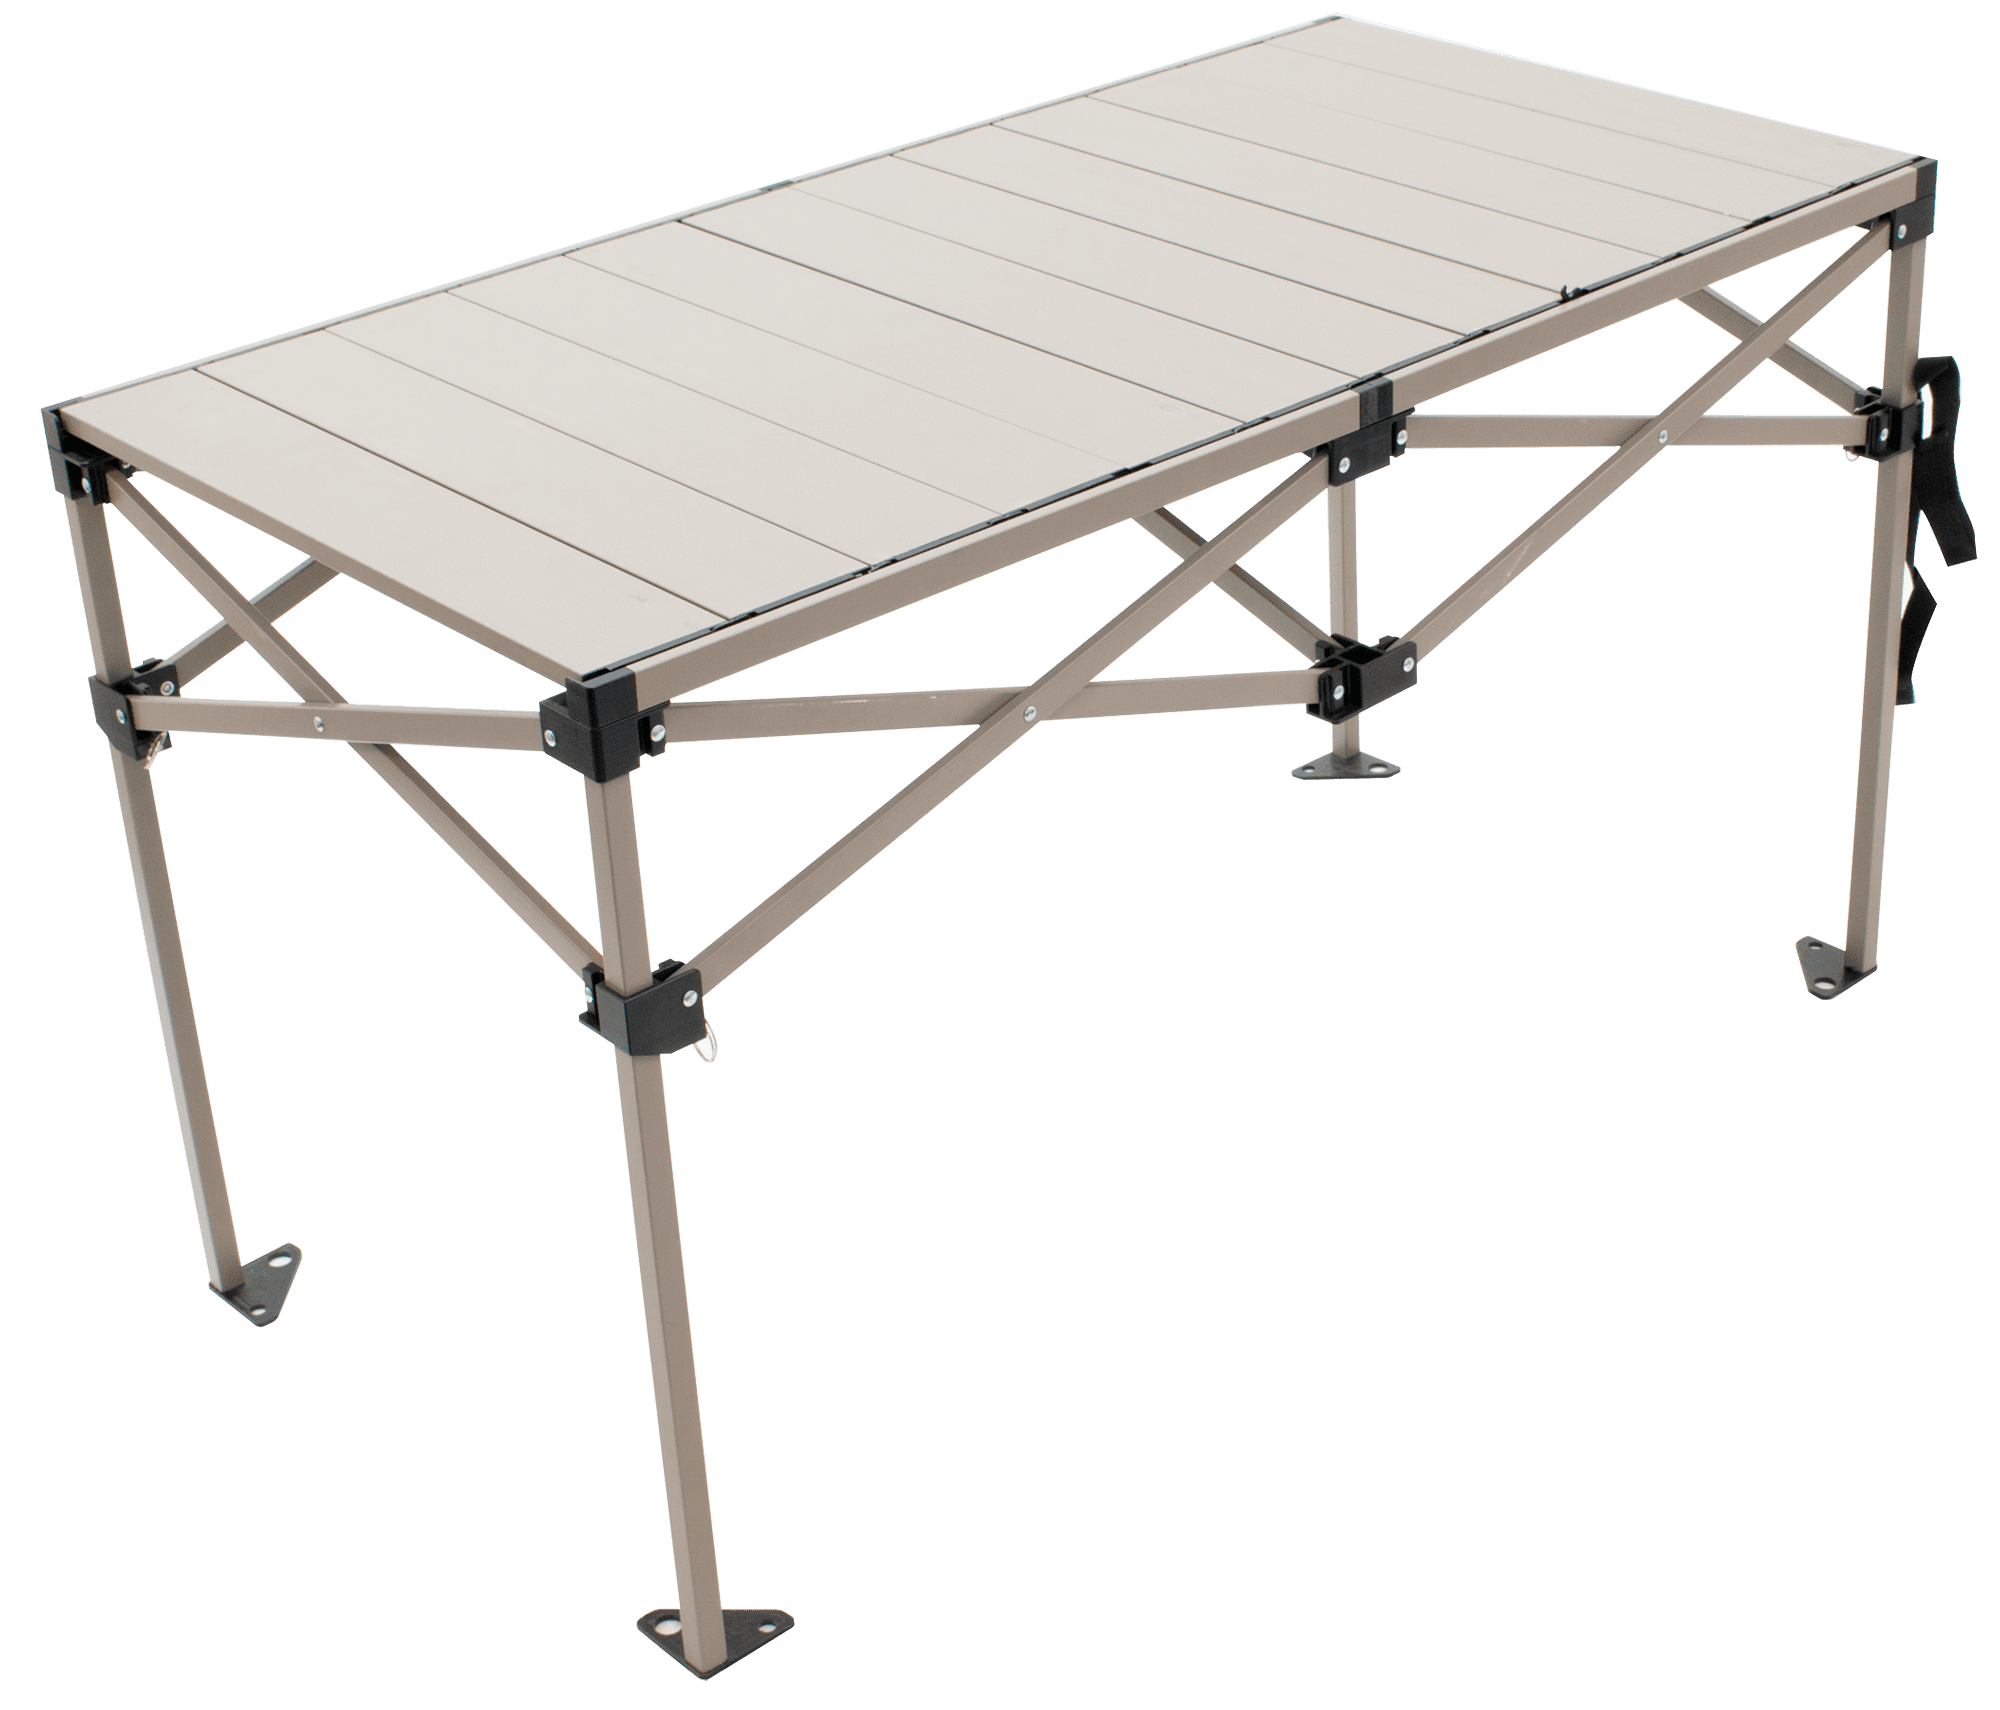 sturdy camping table